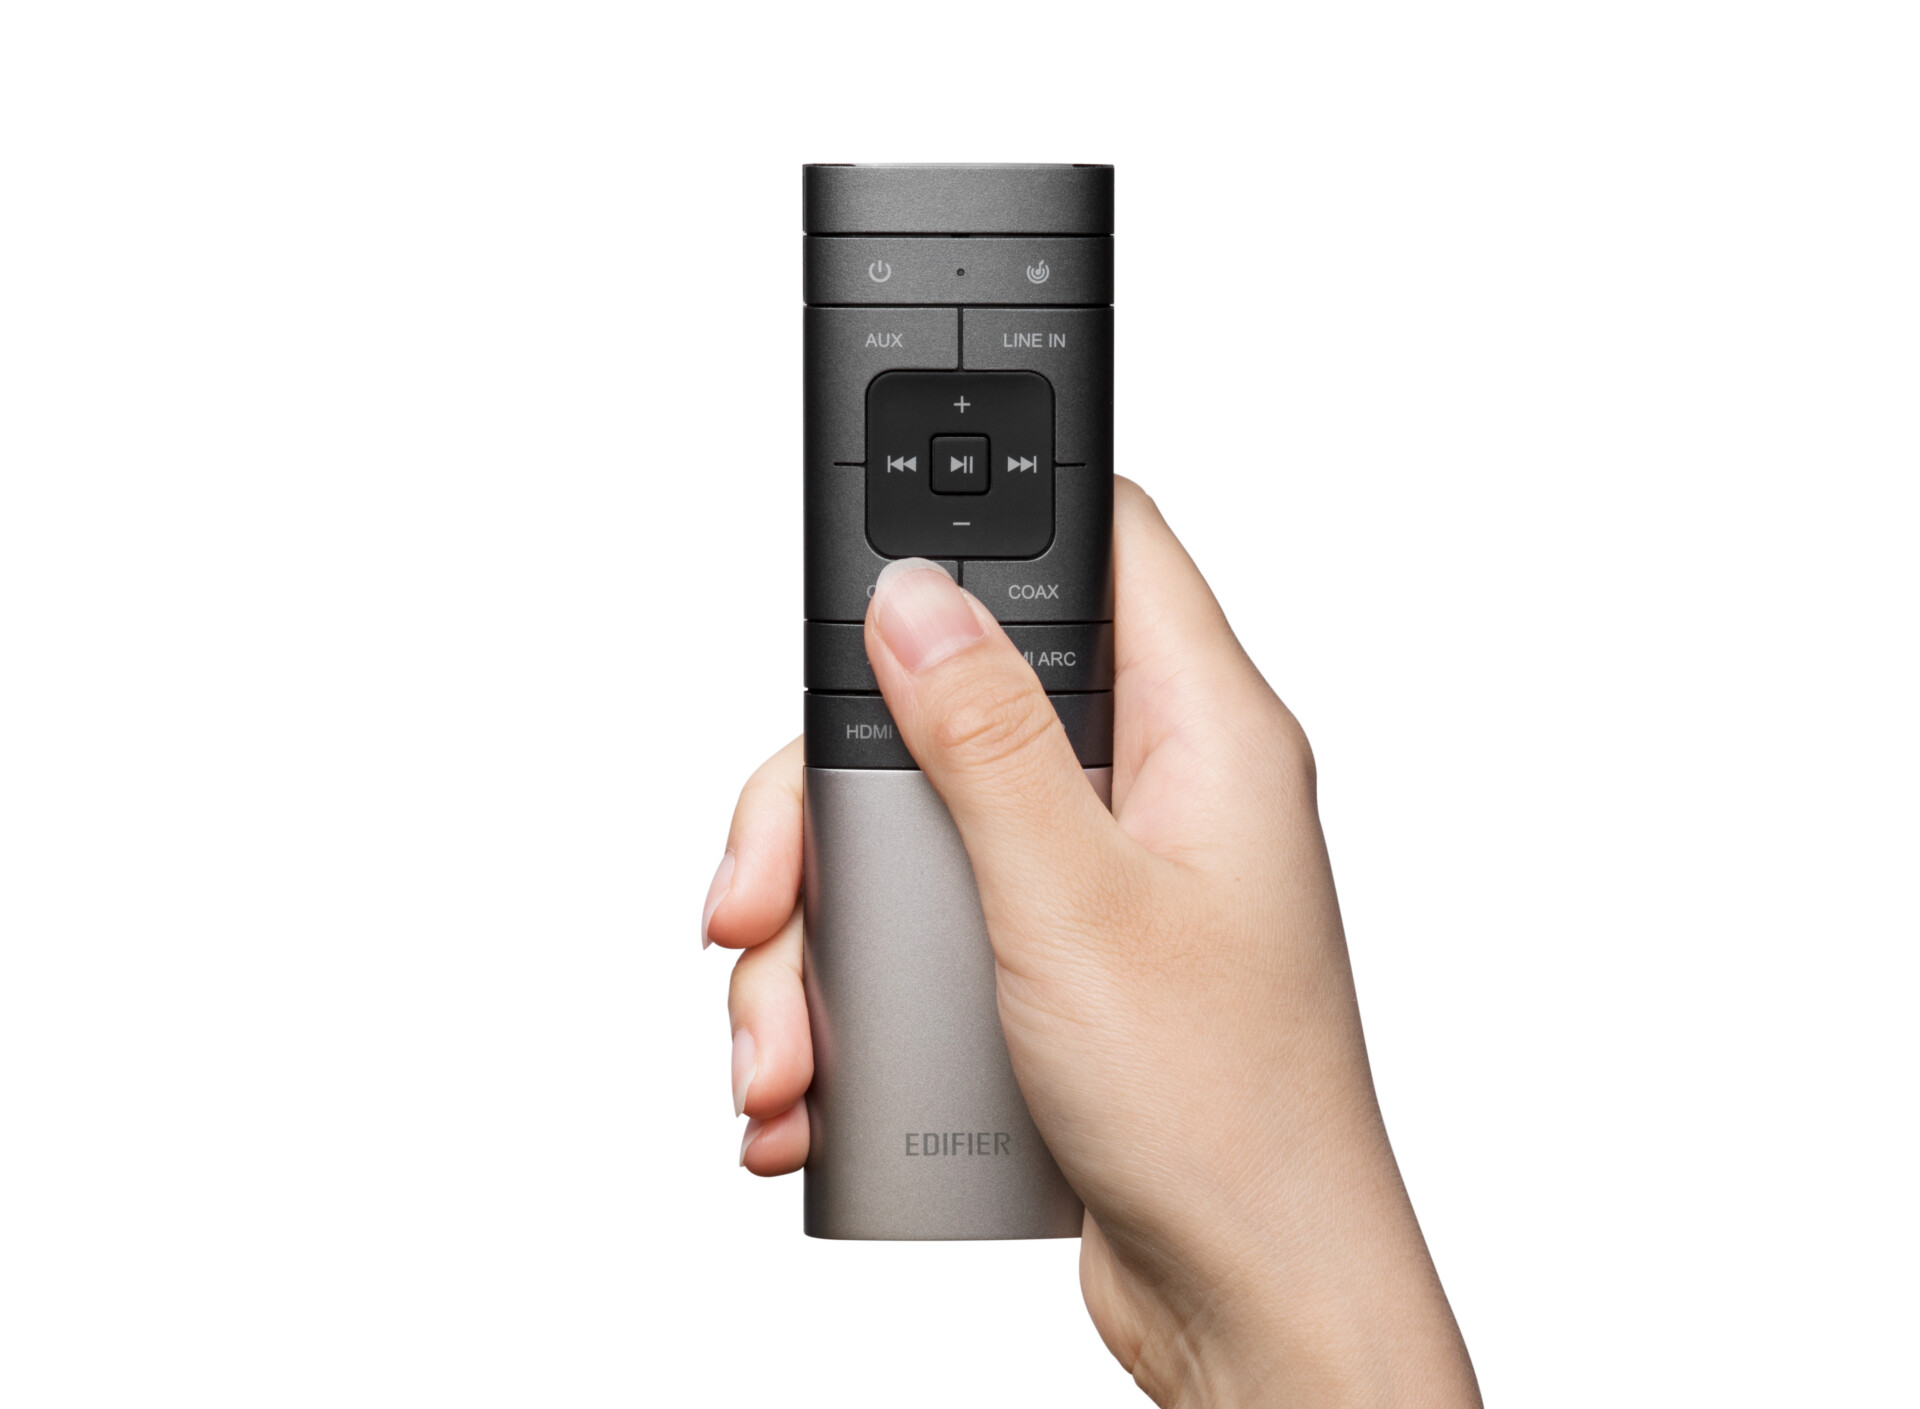 Product image of Edifier remote in silver. The remote is held in a woman's hand against a white background.